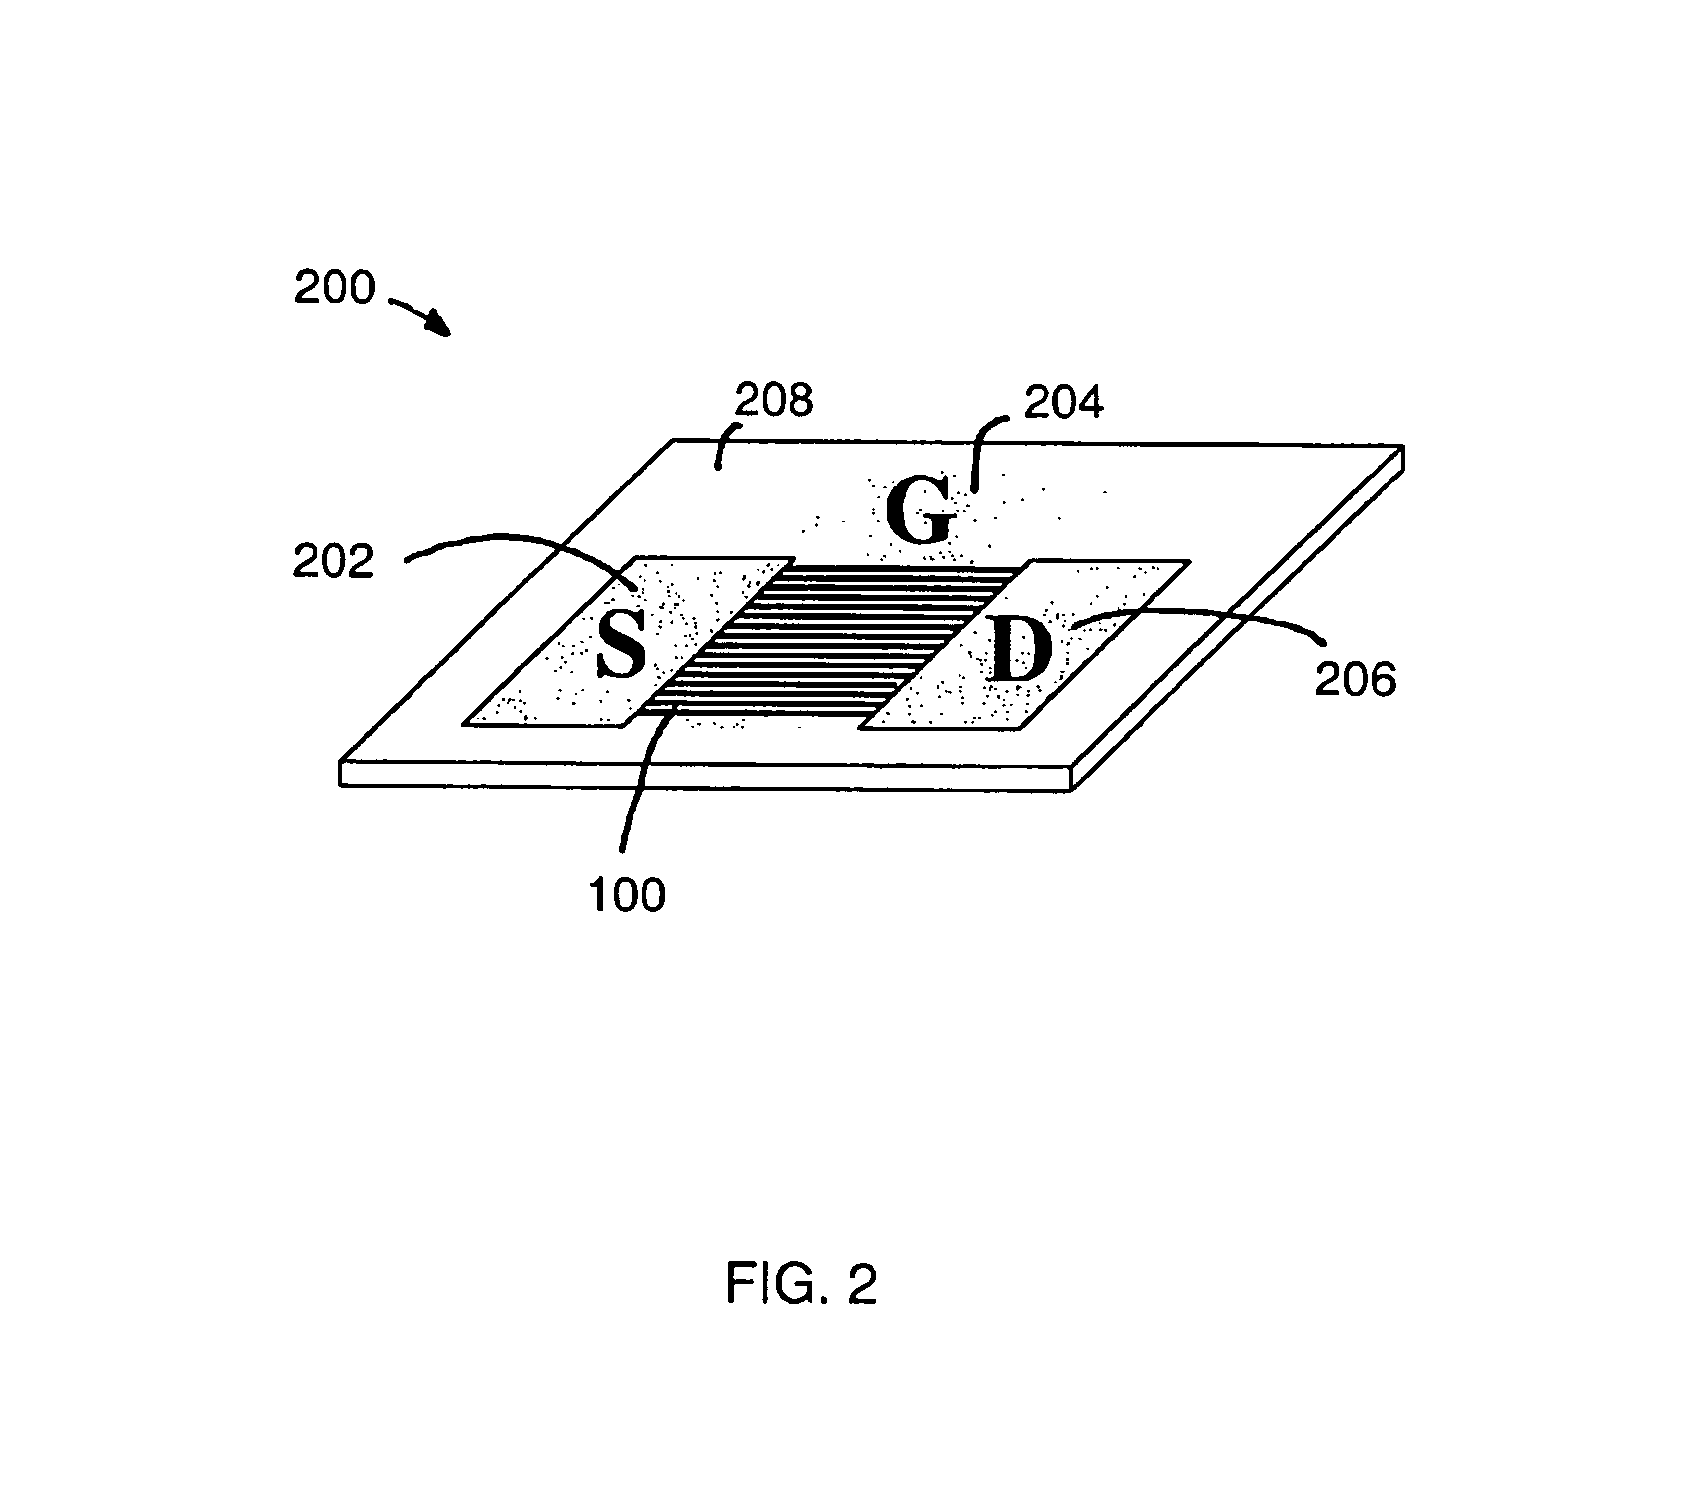 Large-area nanoenabled macroelectronic substrates and uses therefor